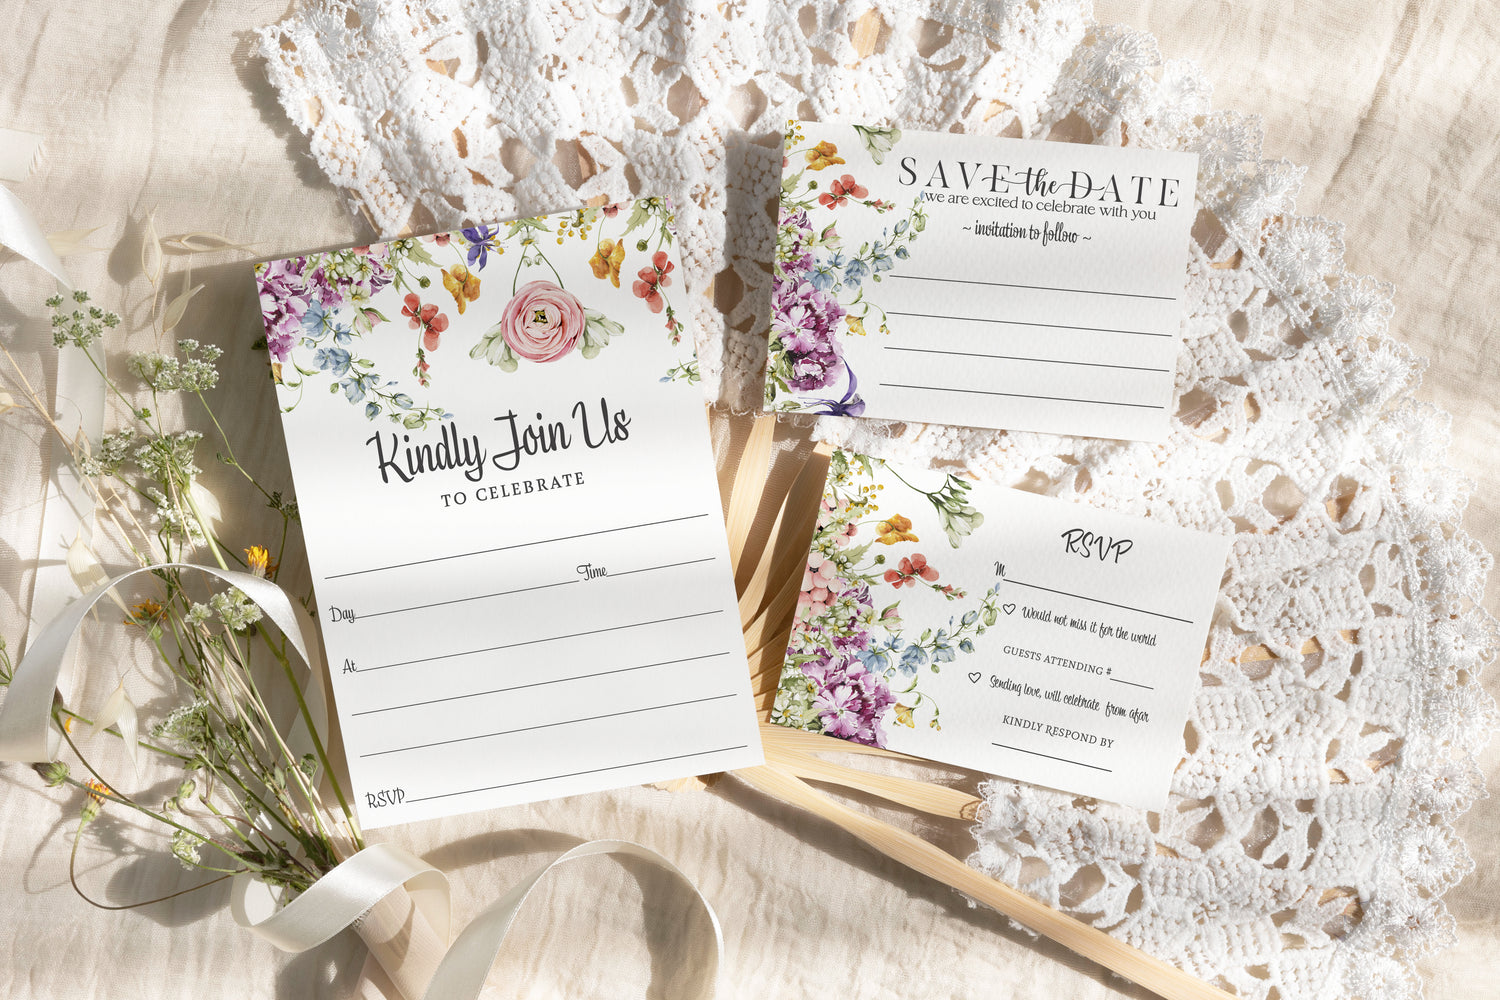 Discover the charm of countryside nuptials with our rustic summery wildflower-themed wedding supplies. 